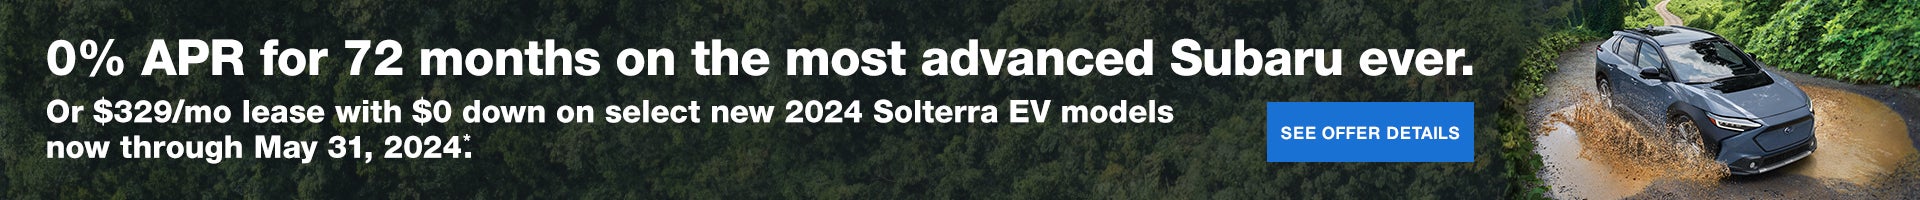 0% APR for 72 Months or $329/mo lease with $0 down on select new 2024 Solterra EV models